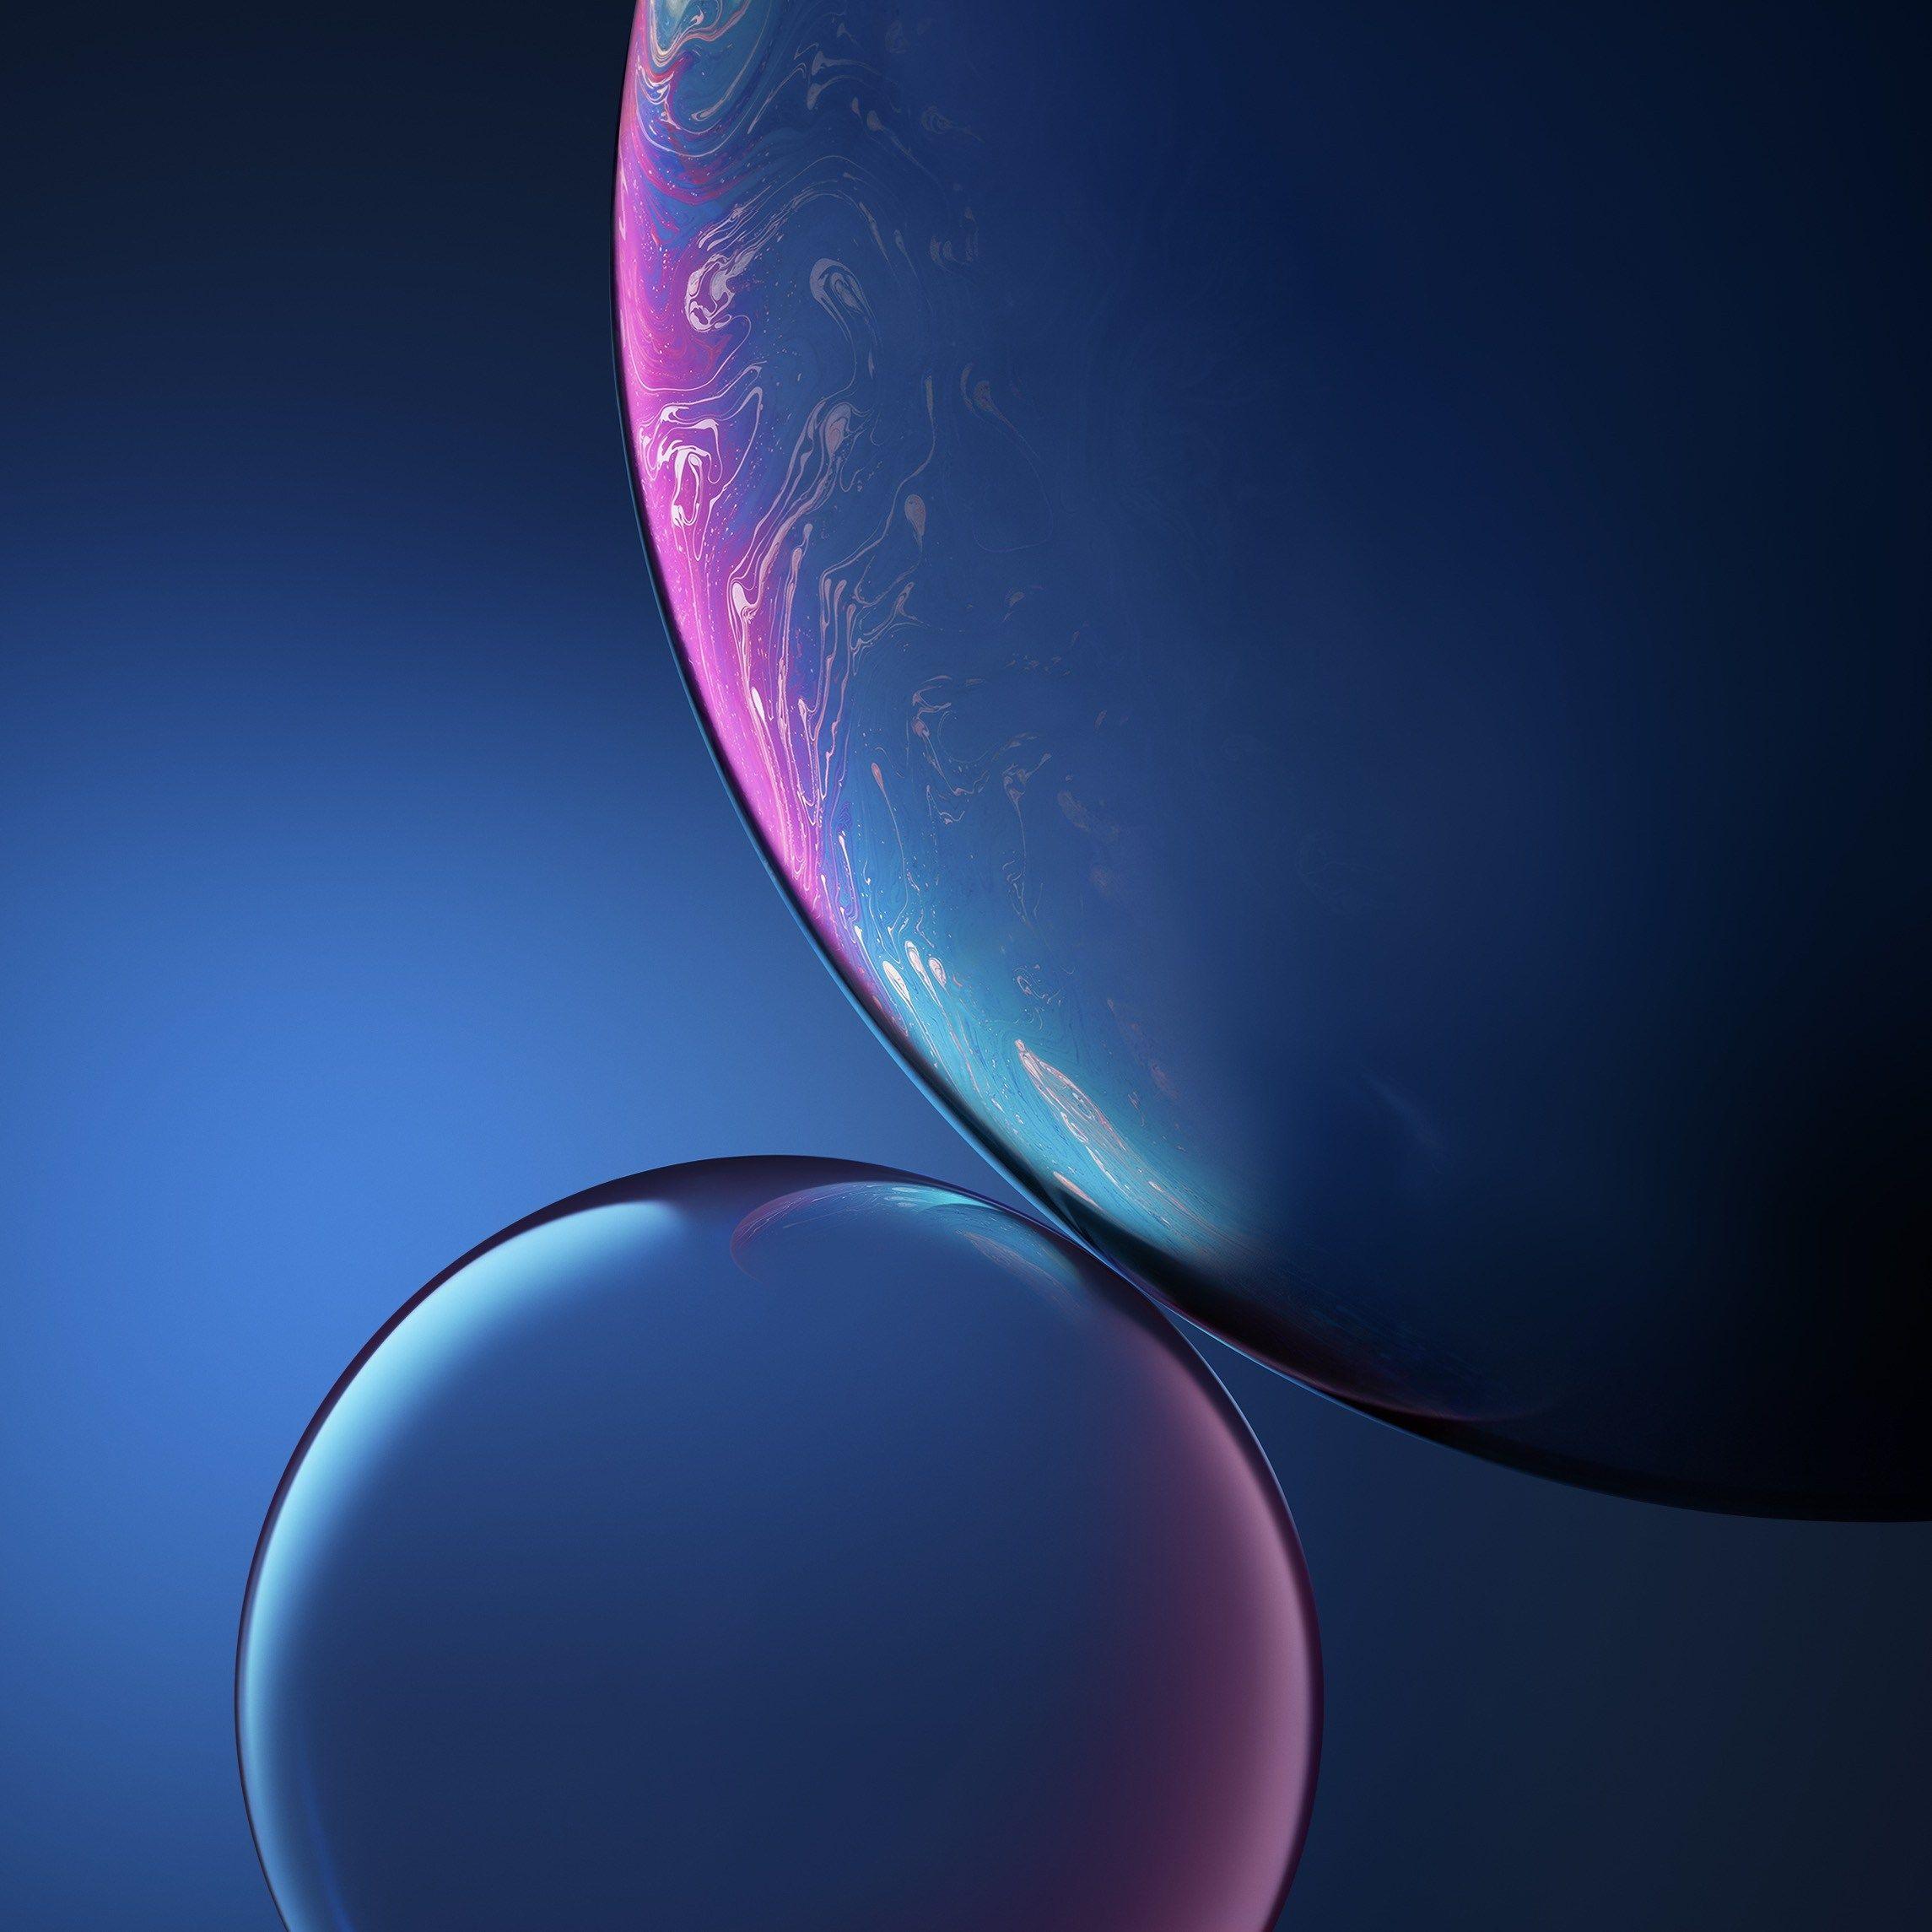 iPhone XR Wallpapers